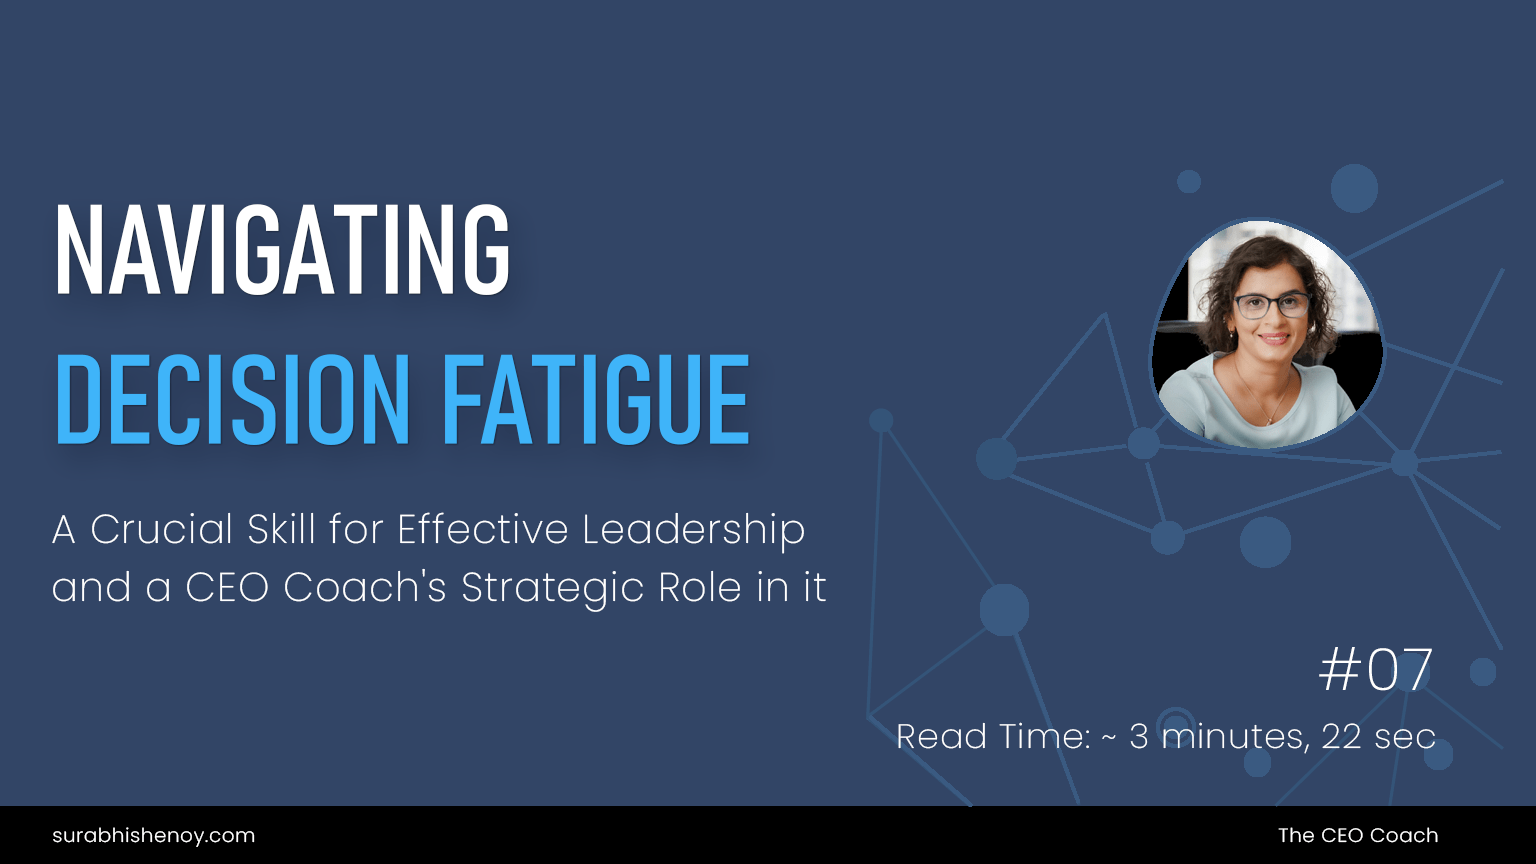 Navigating Decision Fatigue: A Crucial Skill for Effective Leadership and a CEO Coach's Strategic Role in it